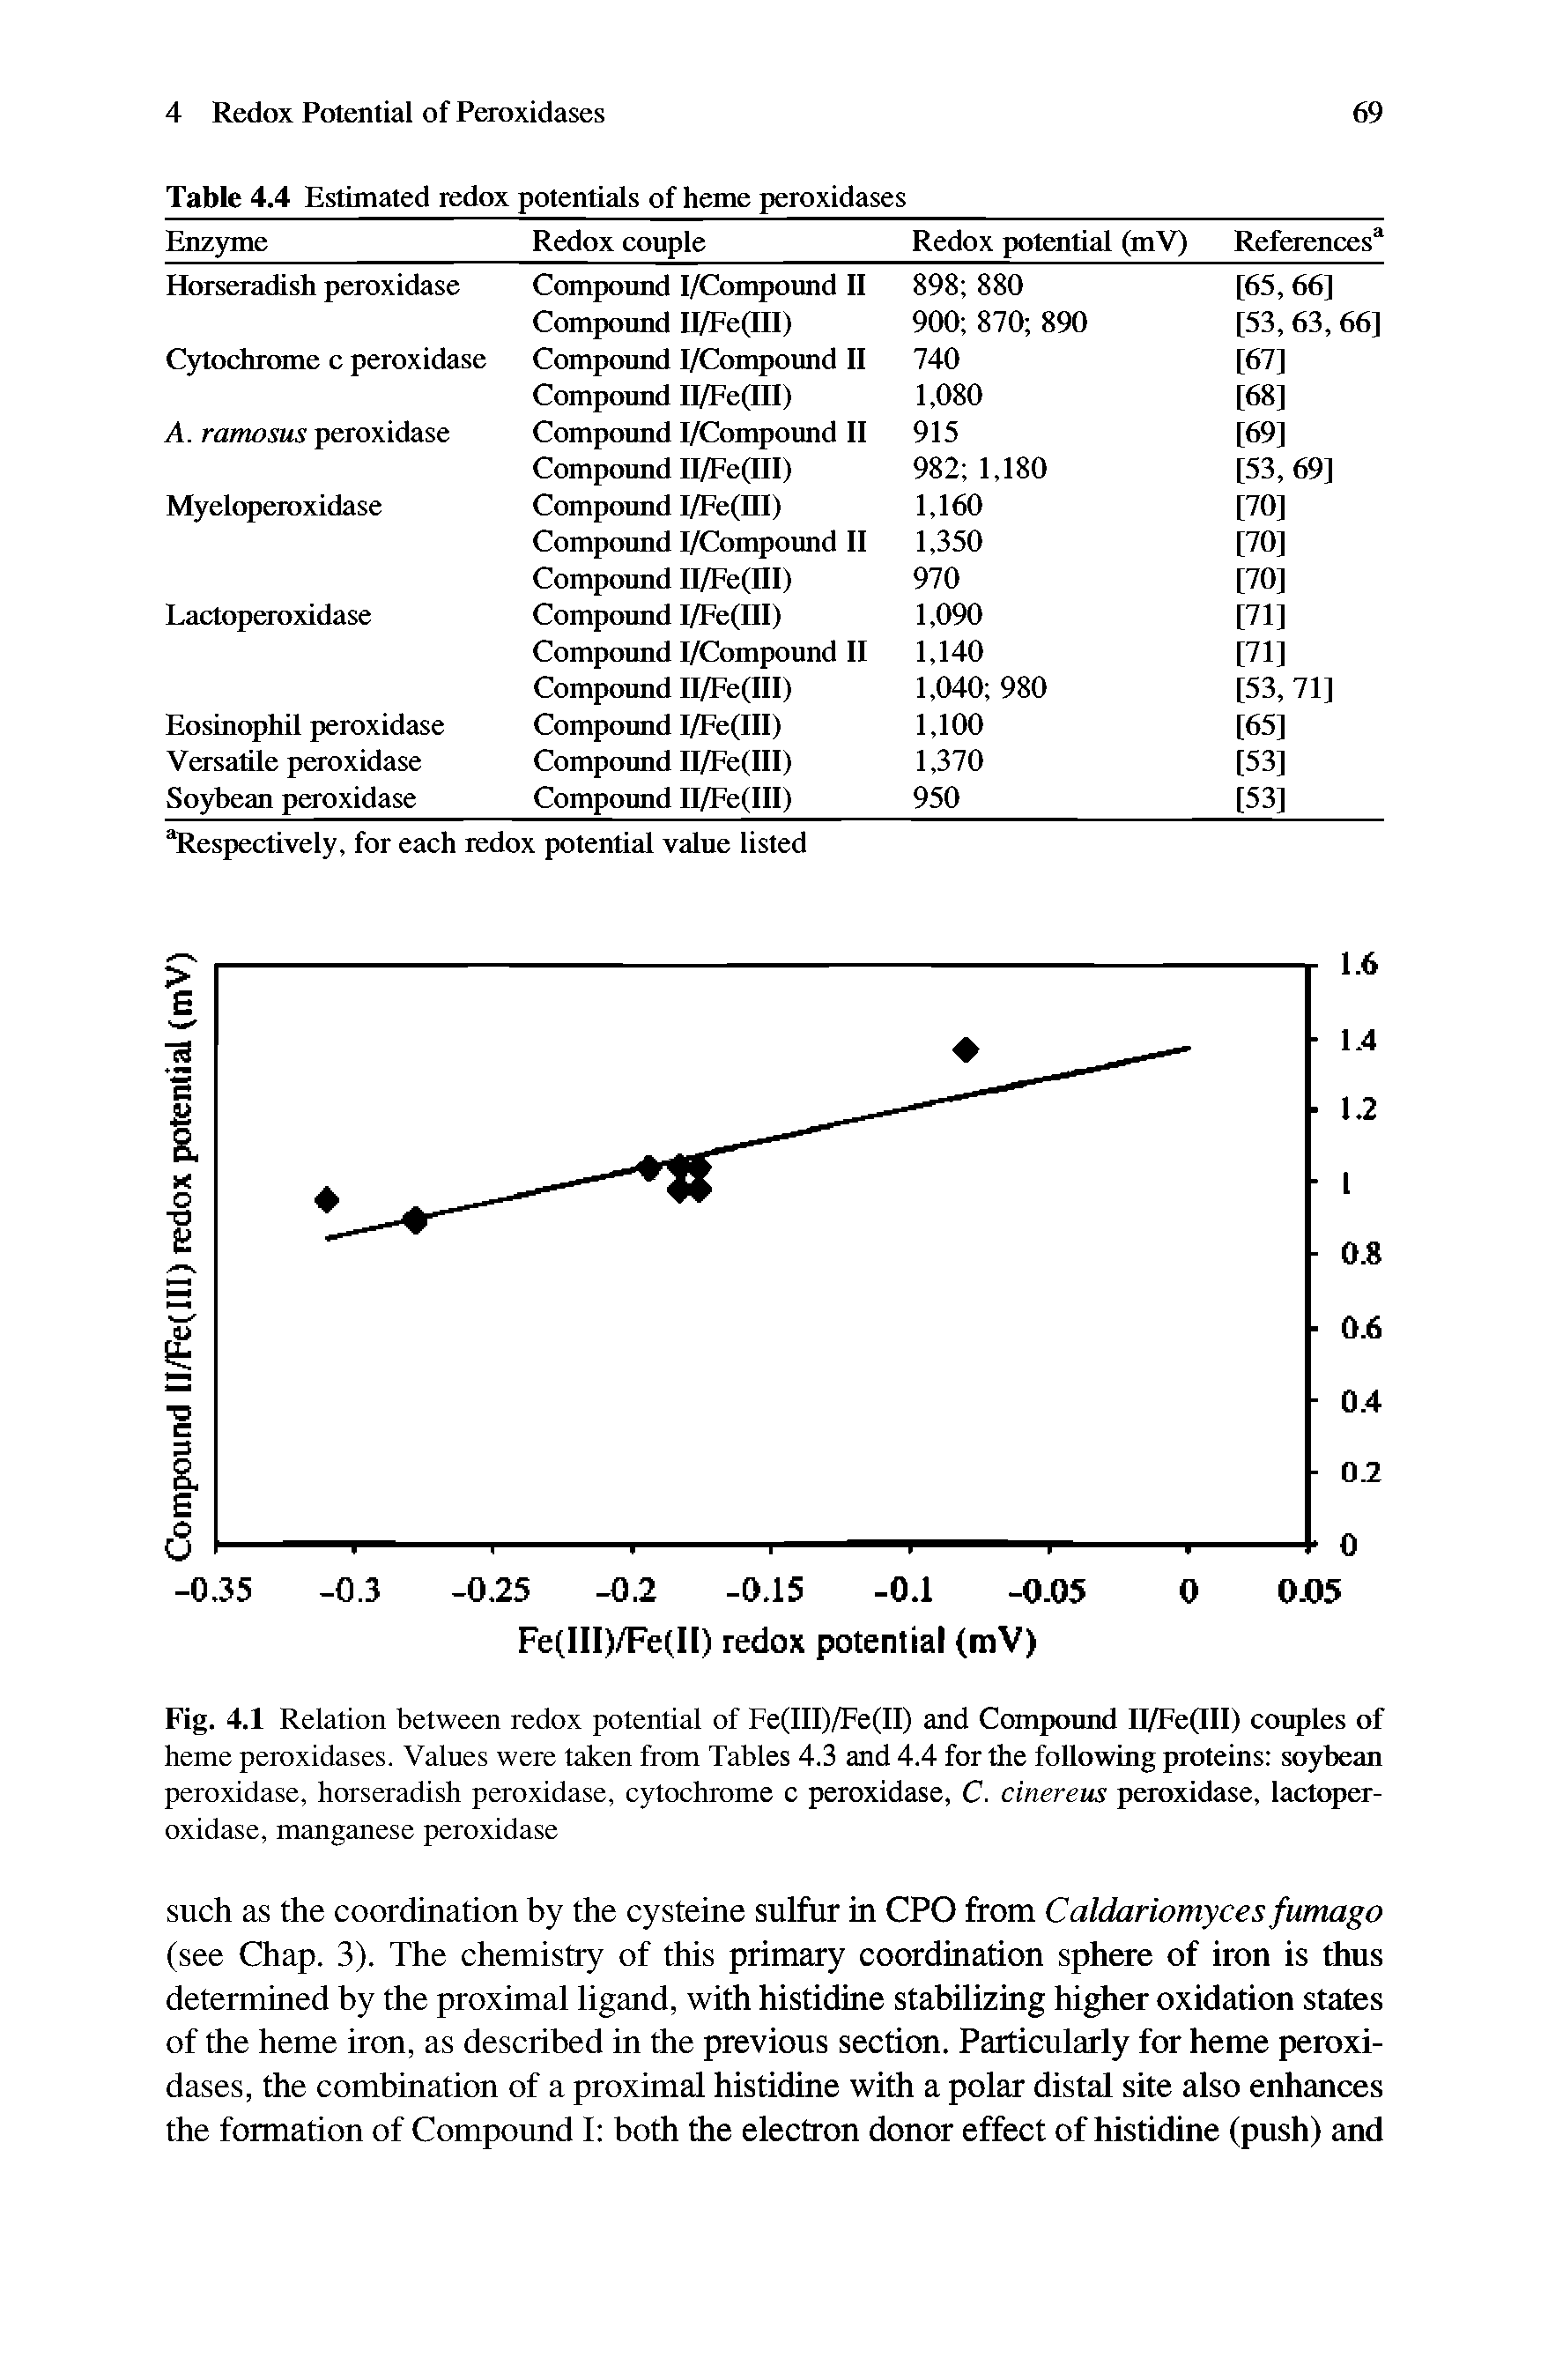 Fig. 4.1 Relation between redox potential of Fe(III)/Fe(II) and Compound II/Fe(III) couples of heme peroxidases. Values were taken from Tables 4.3 and 4.4 for the following proteins soybean peroxidase, horseradish peroxidase, cytochrome c peroxidase, C. cinereus peroxidase, lactoper-oxidase, manganese peroxidase...